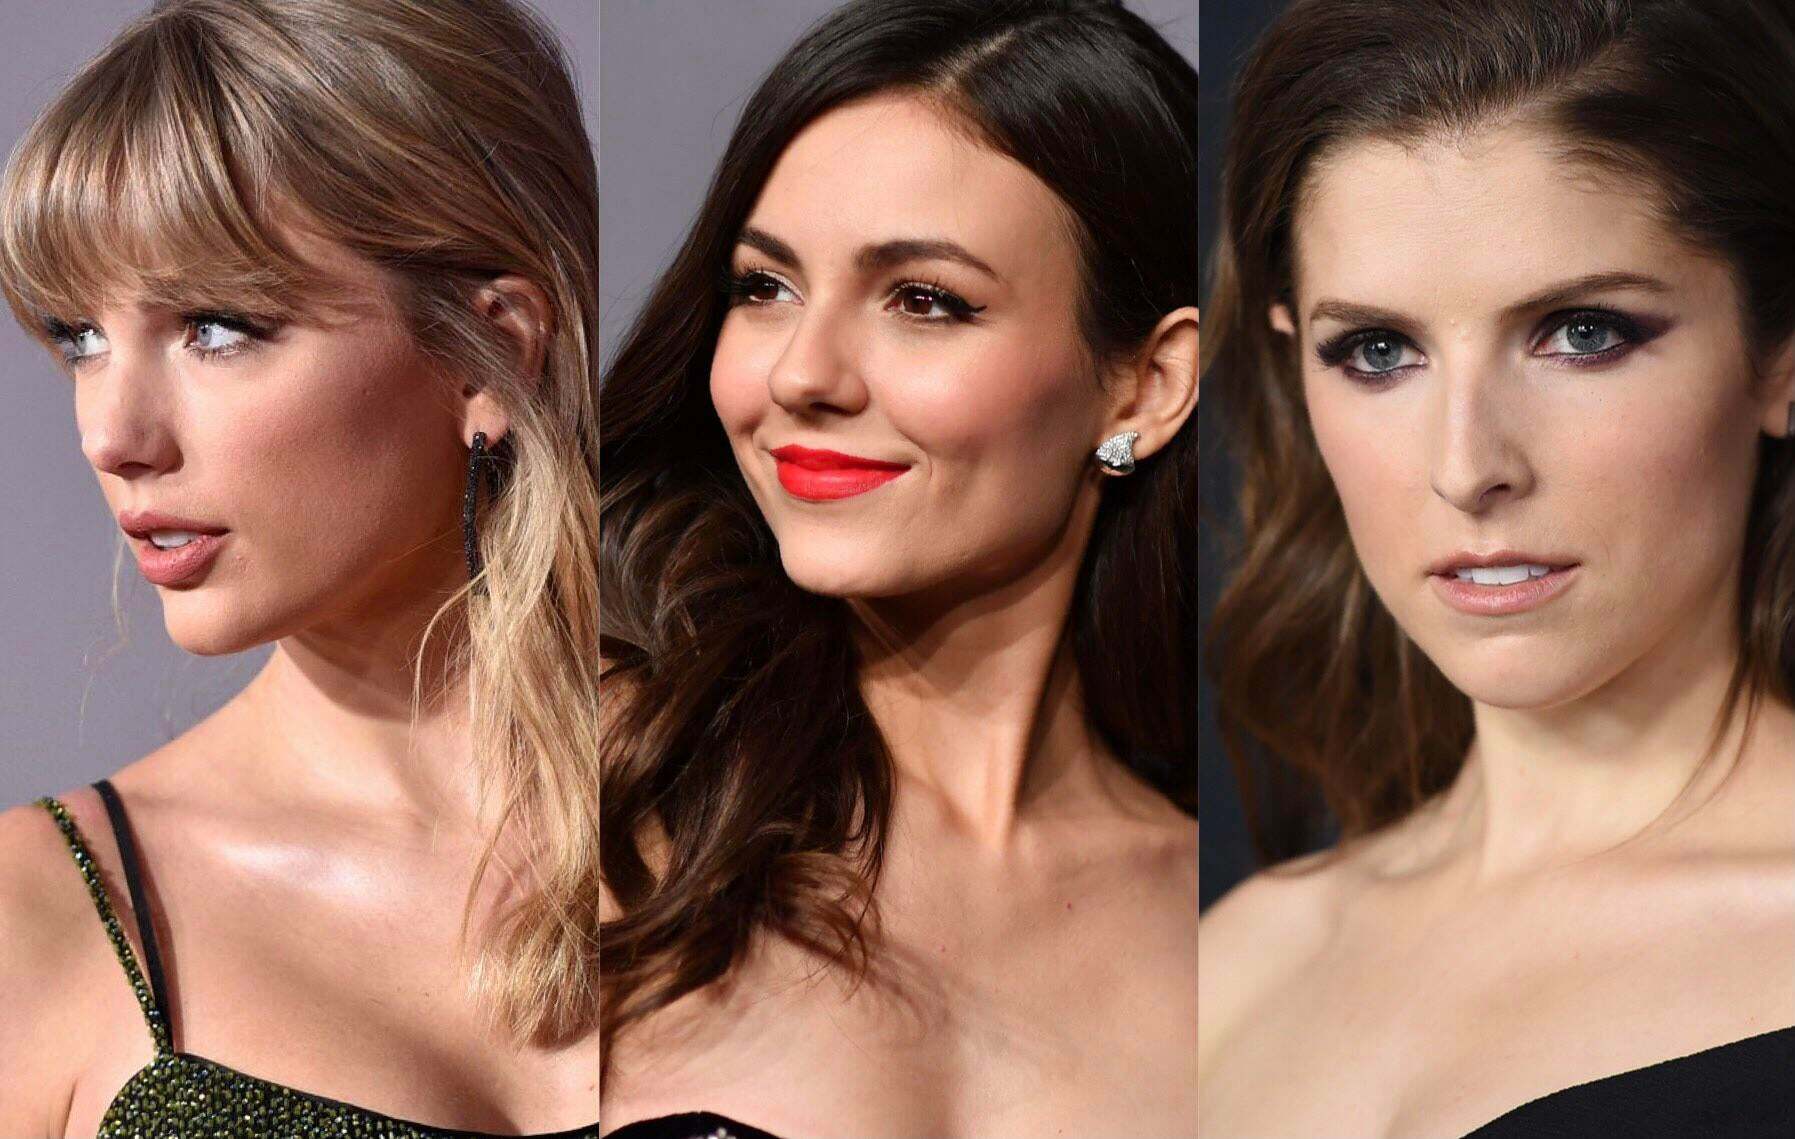 Taylor Swift, Victoria Justice & Anna Kendrick, all walk into a room and catch you jerking off! Which one do you think would; call you a perv and storm out? Start masturbating themselves? Or rush over to suck you off?